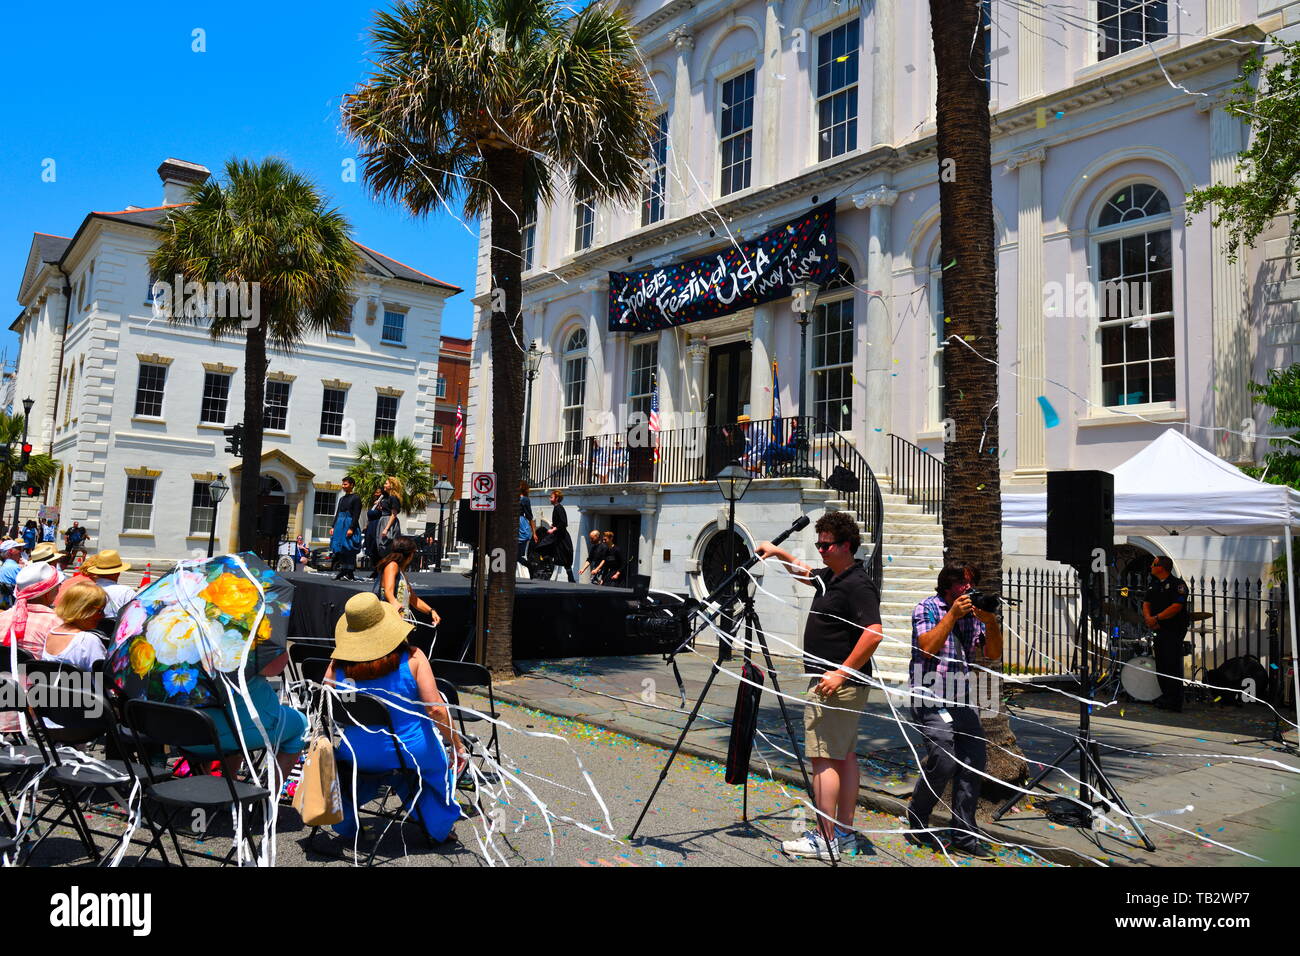 Opening Ceremony for Spoleto 2019 in Front of City Hall in Charleston, SC to Celebrate the Arts for 18 Days Stock Photo